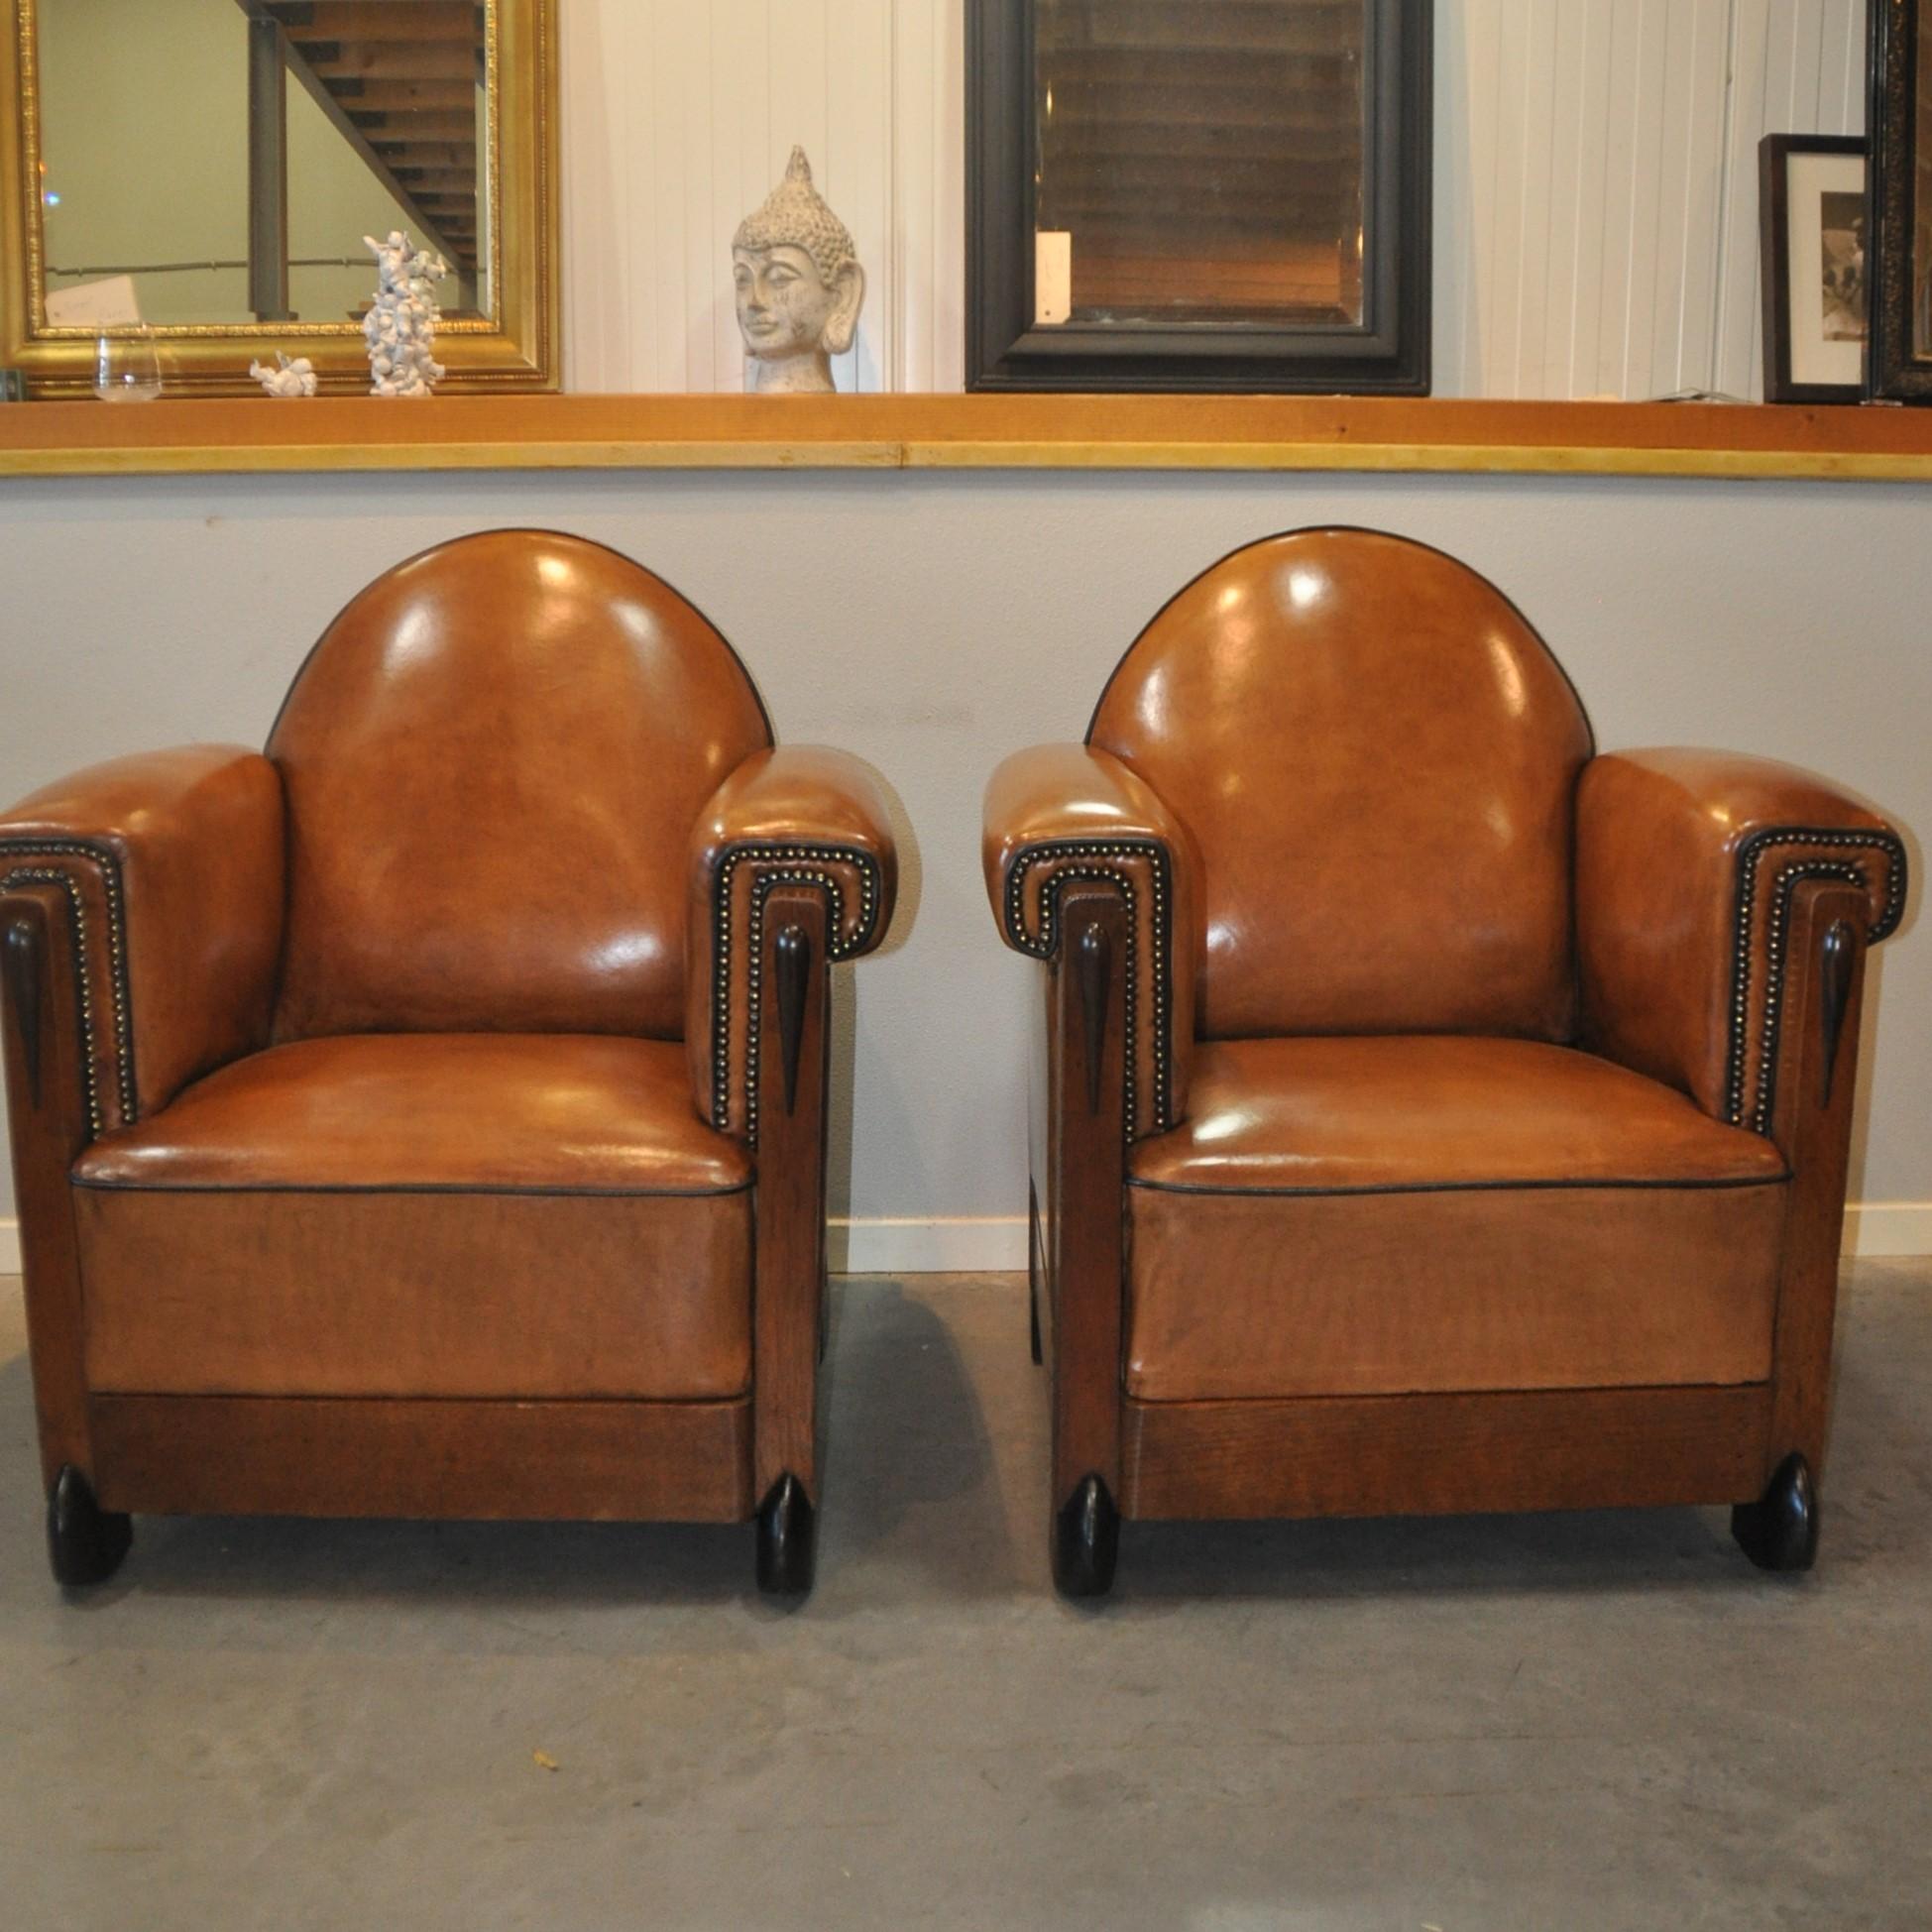 Amazing set of newly upholstered Art Deco sheep leather armchairs. These beautiful armchairs are in top (new) condition and upholstered with the best quality sheep leather. Equipped with fixed seats and finished with nails and black piping.

The